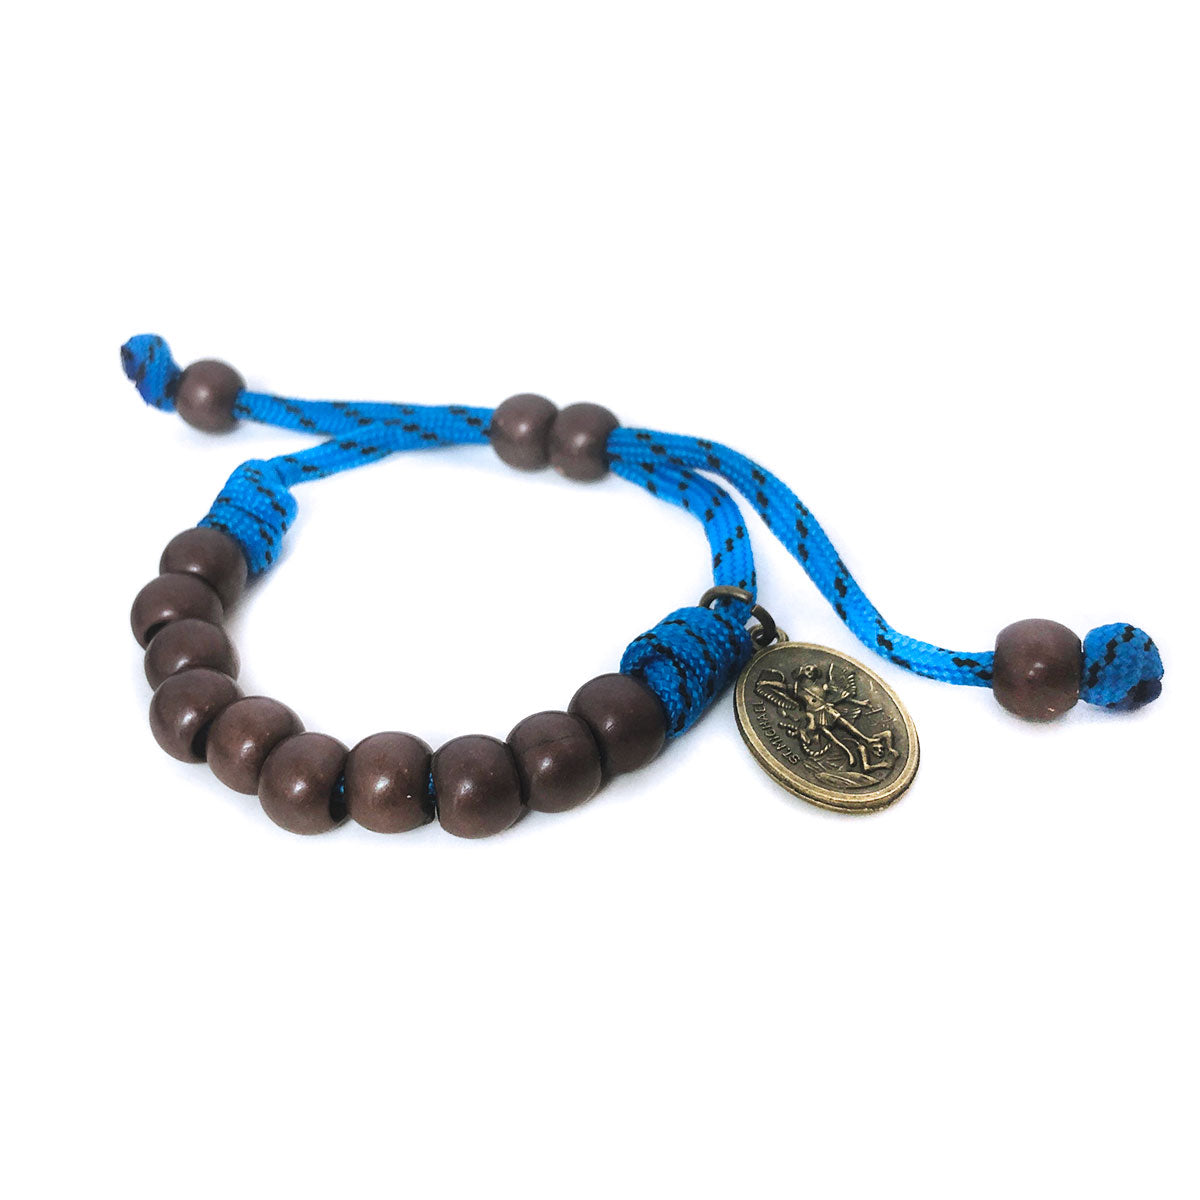 St. Michael Bronze and Blue Paracord Rosary and Rosary Bracelet Set by Catholic Heirlooms